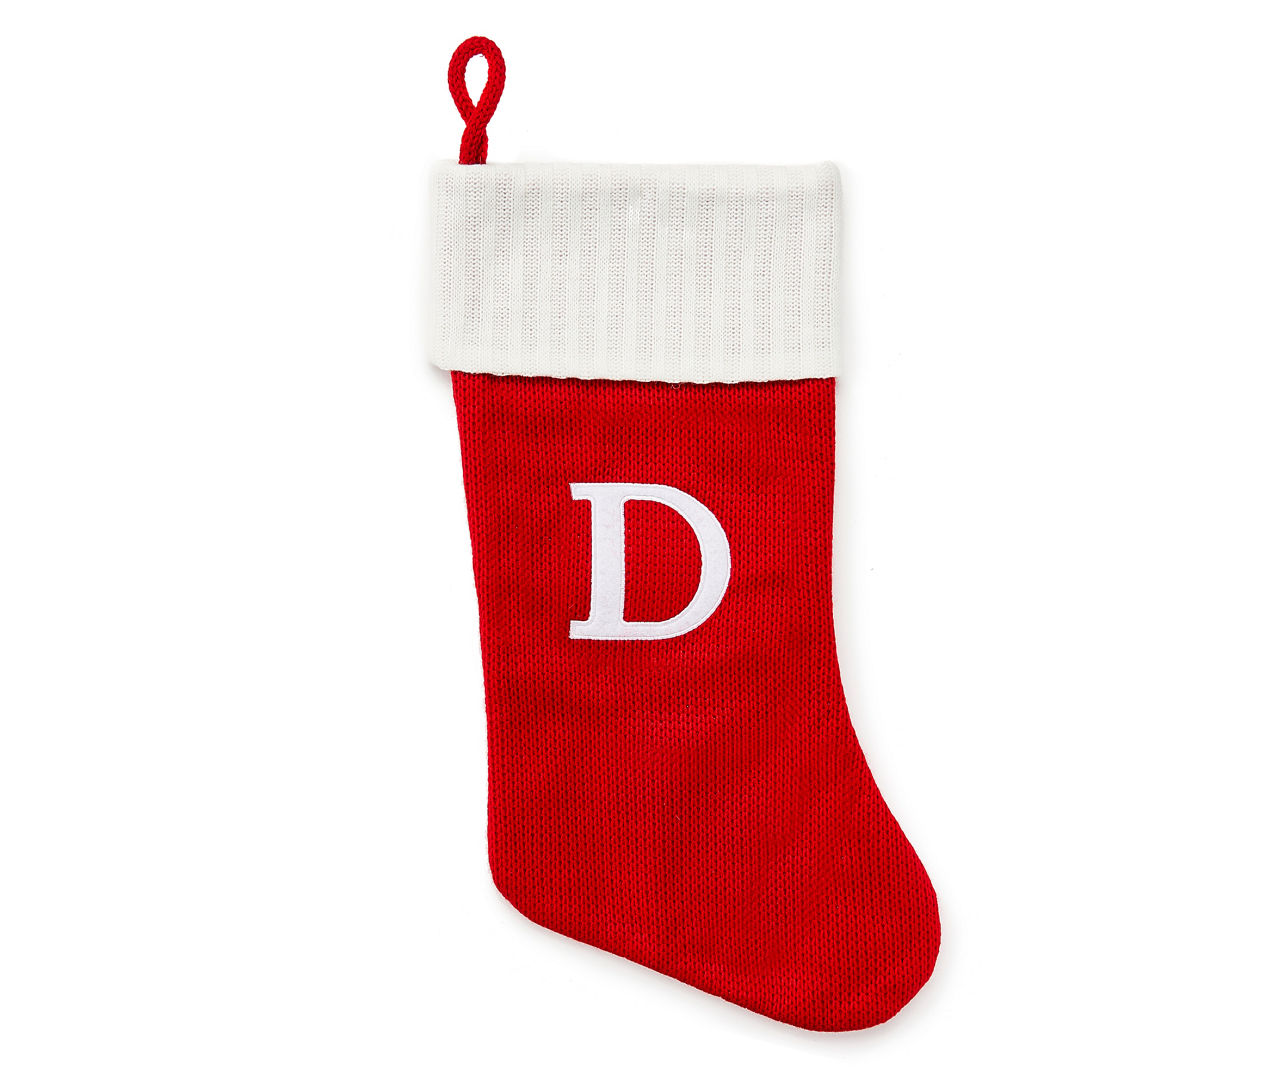 "D" Monogram Red Knit Stocking with White Trim